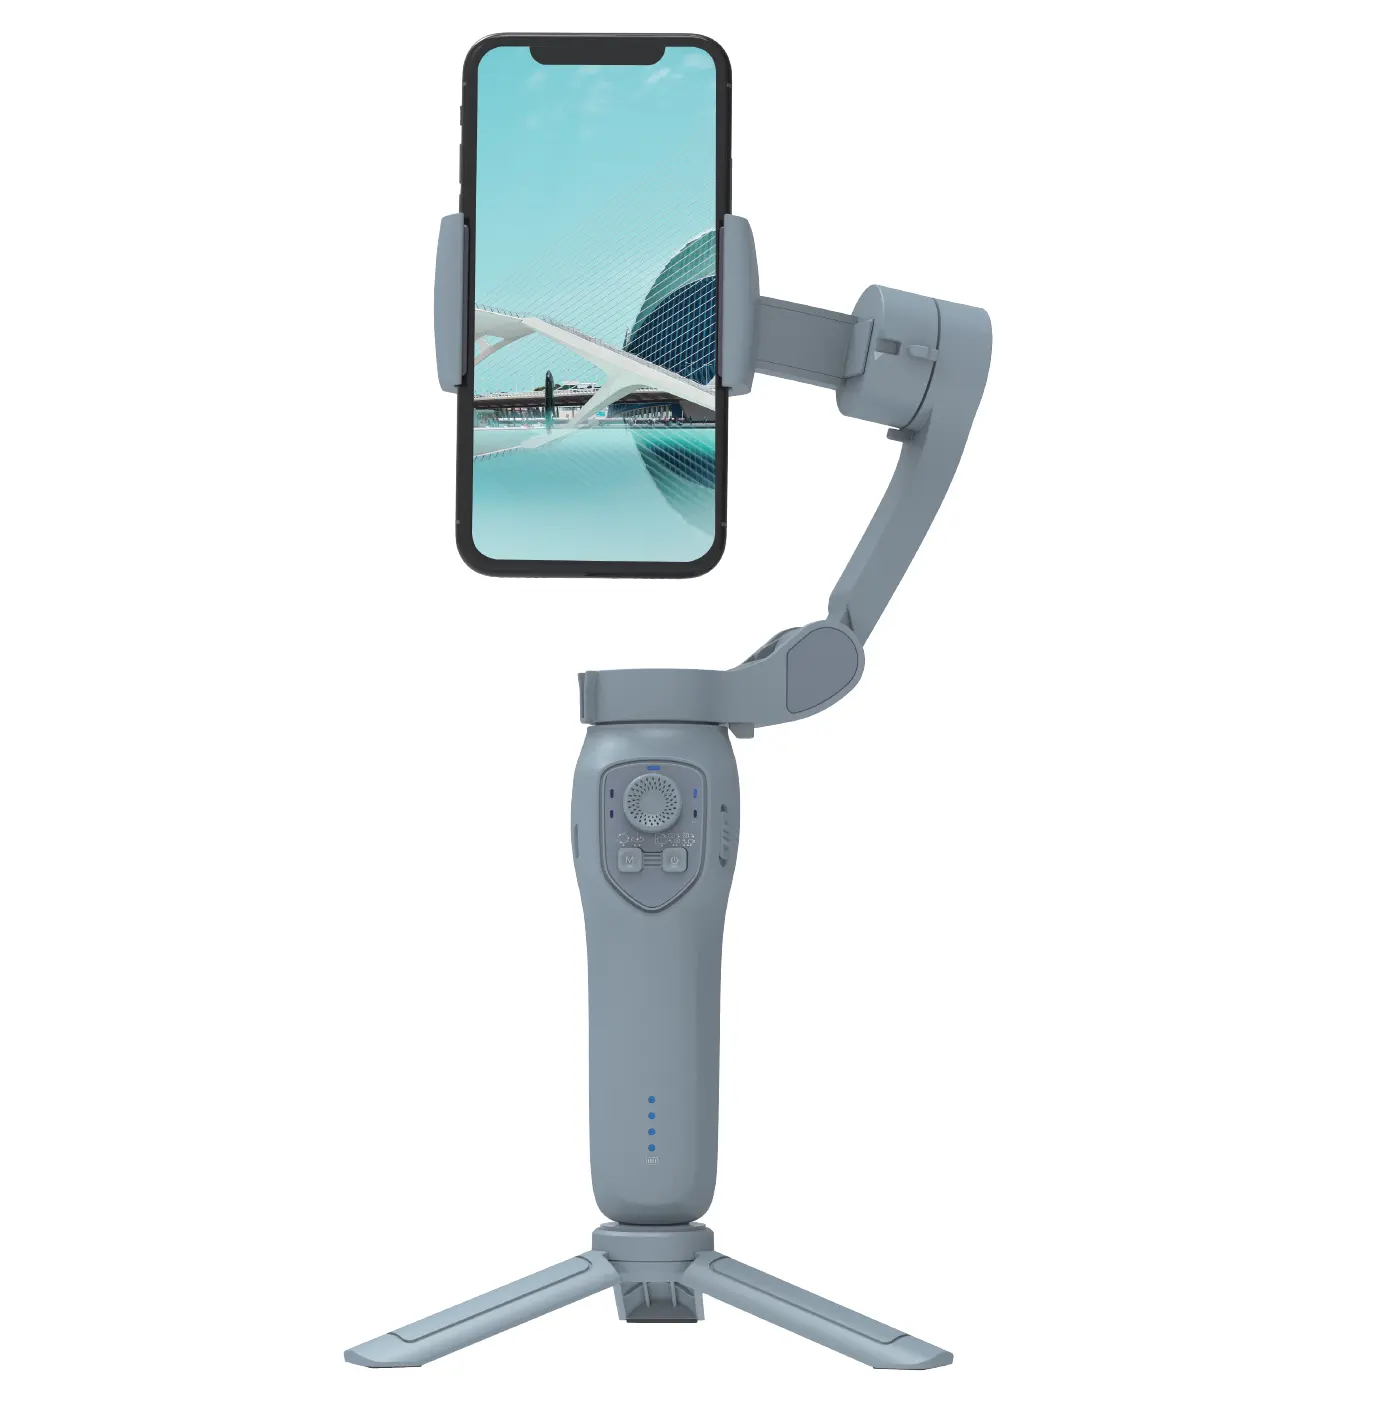 2022 smartphone gimbal Stabilizing L7B Pro Holder Handhold Auto face tracking gimbal phone stabilizer for IOS and Android